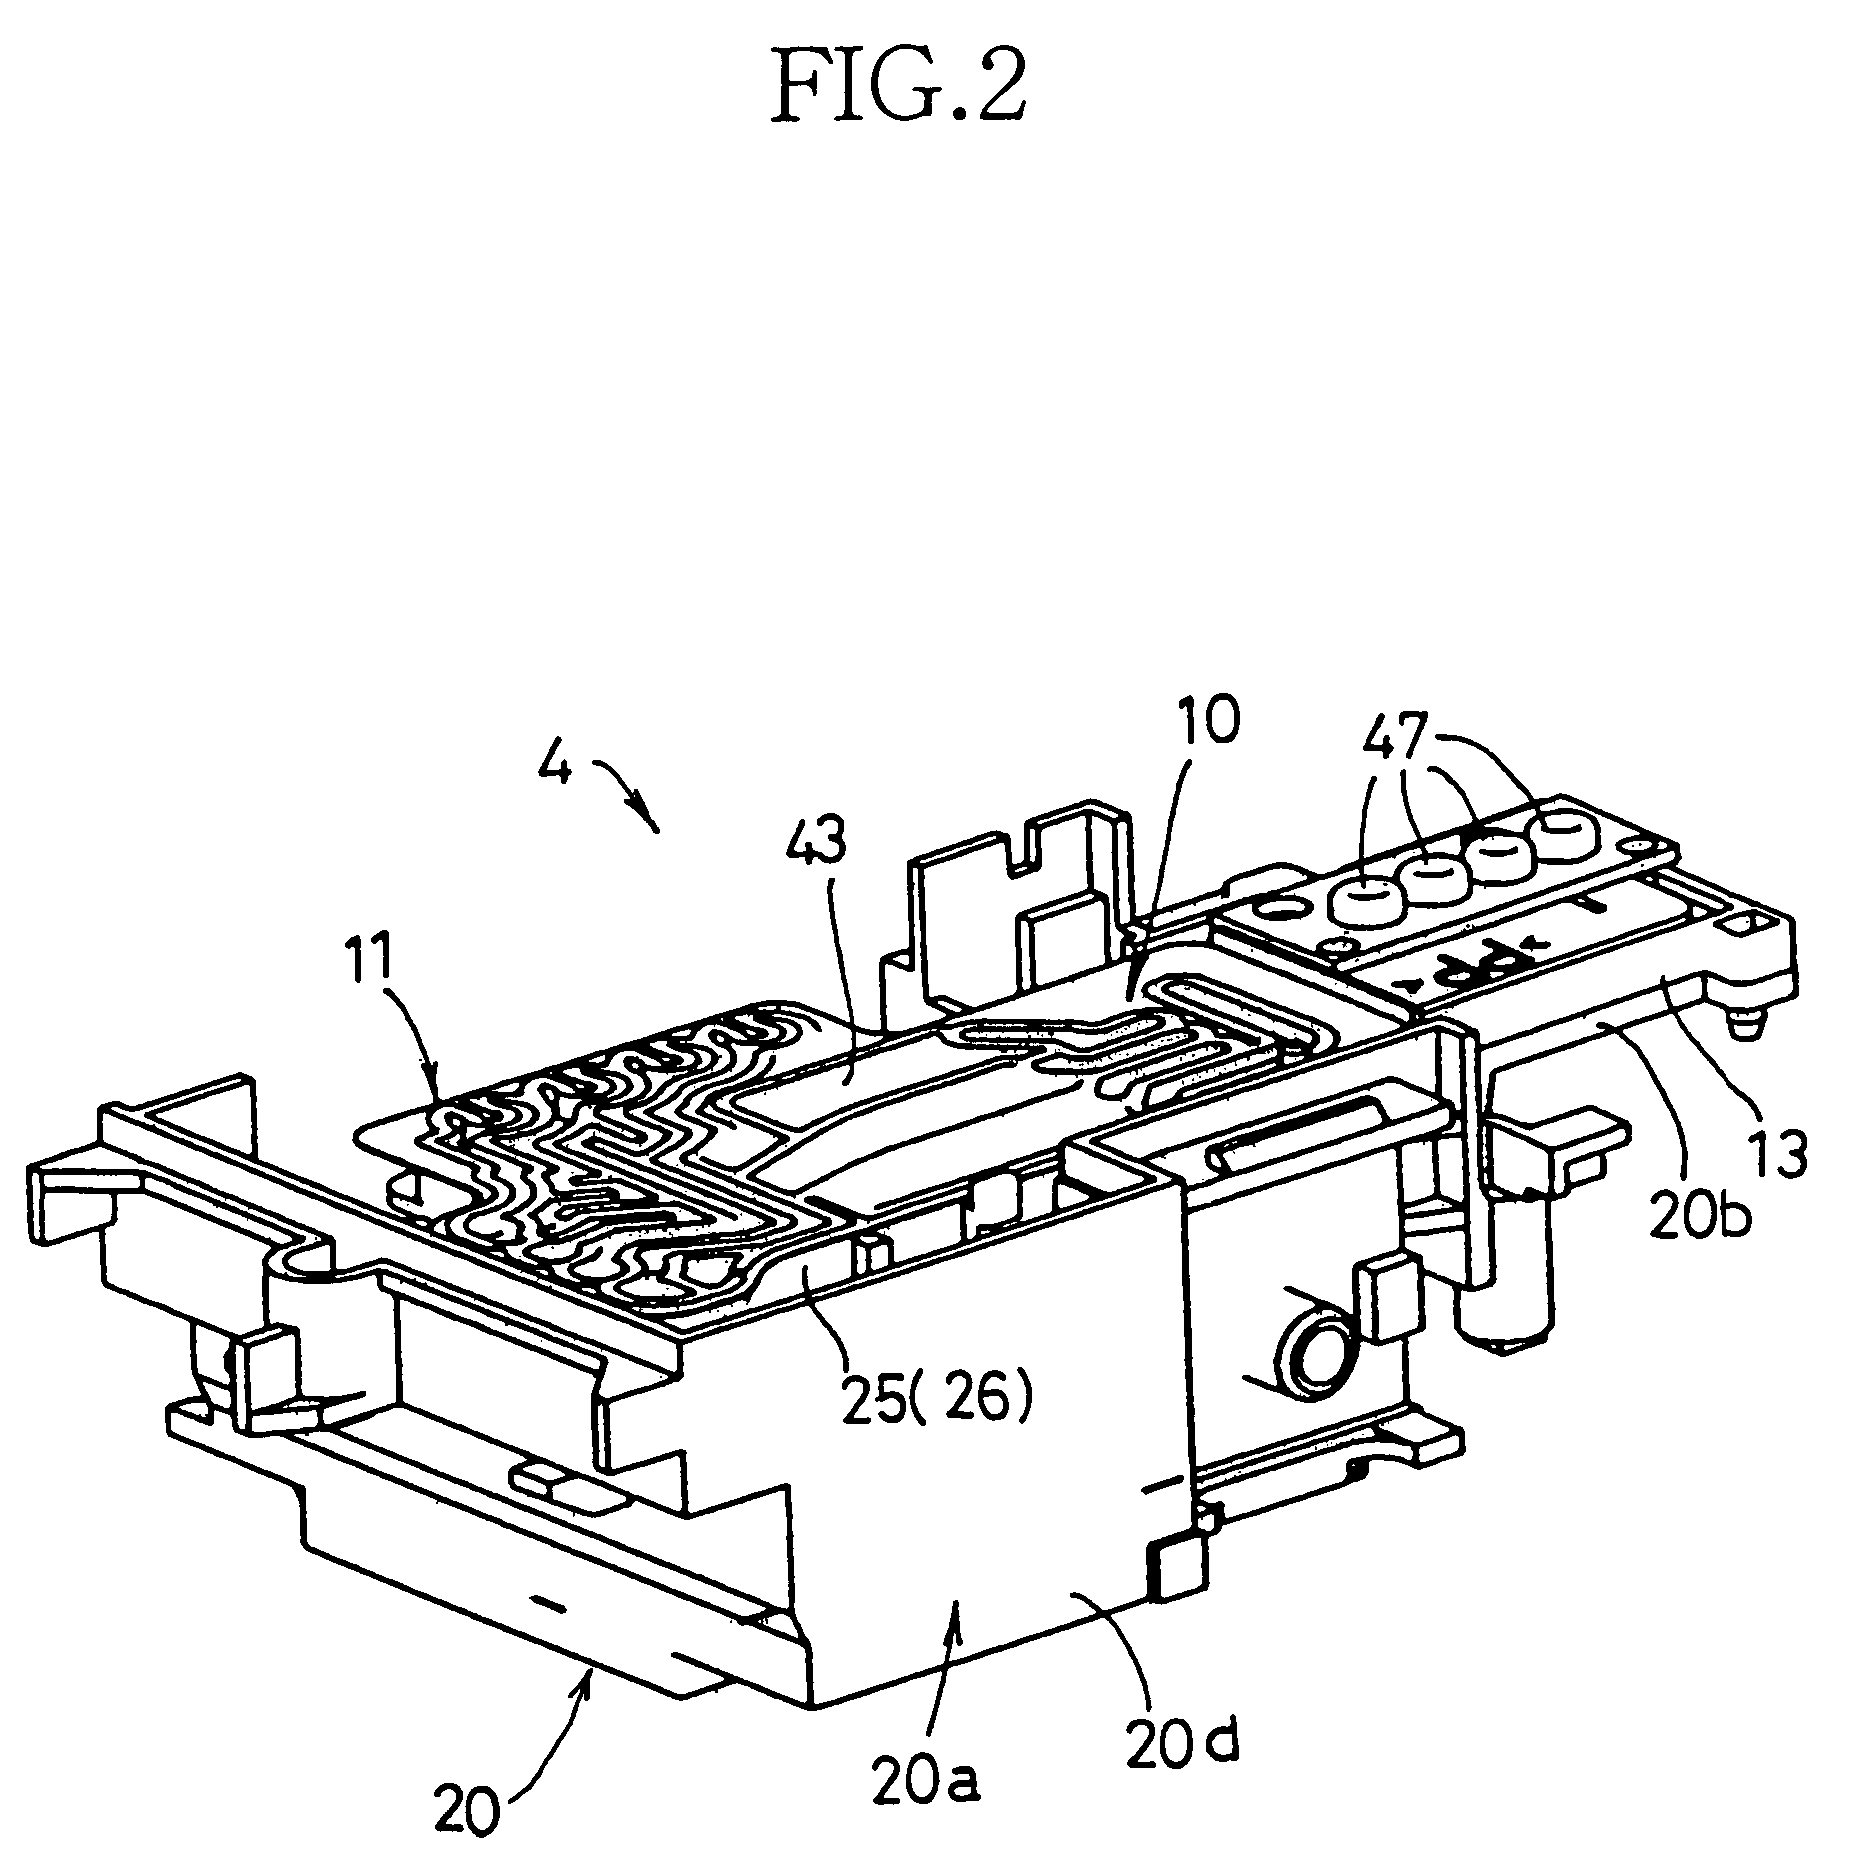 Inkjet printer with delivery chamber